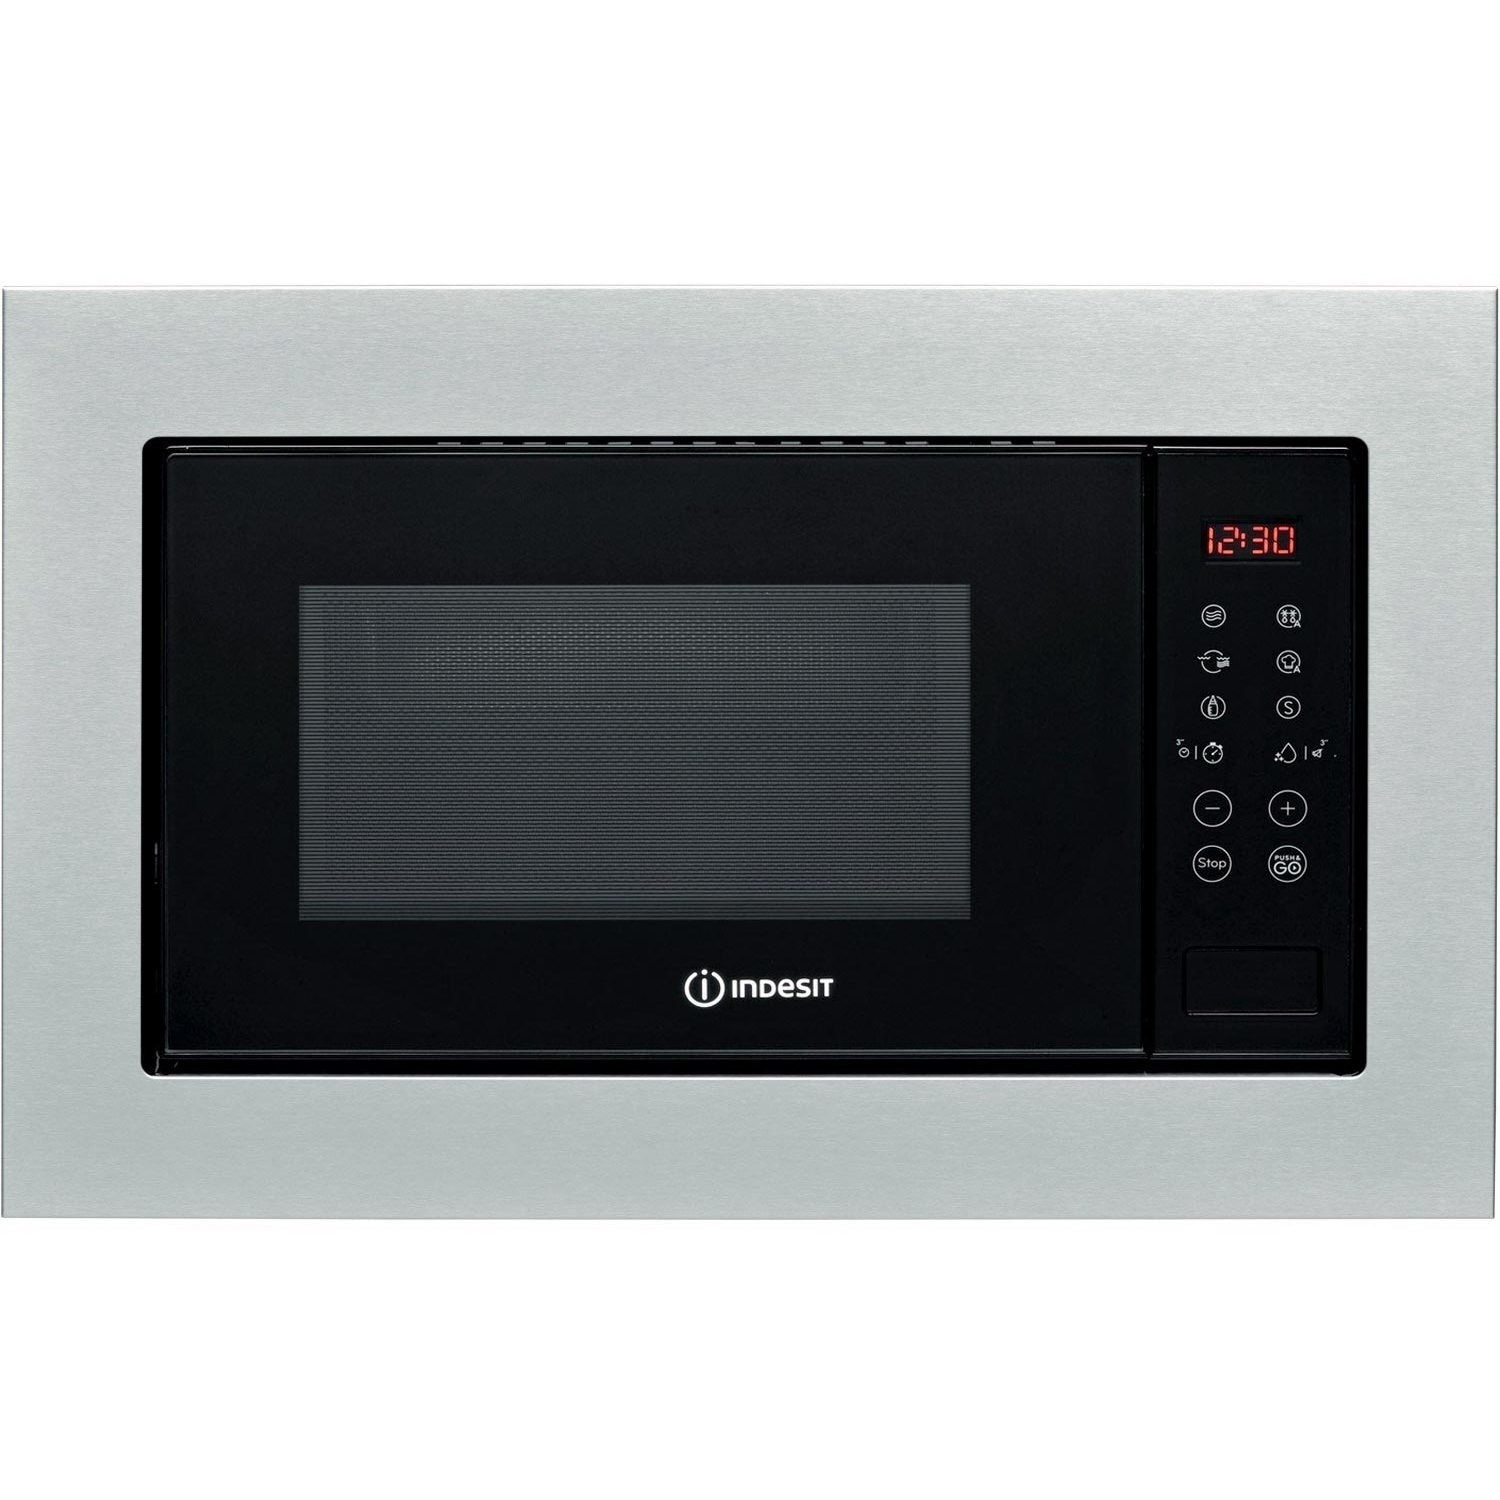 Refurbished Indesit MWI125GX Built In 25L with Grill 900W Microwave Stainless Steel